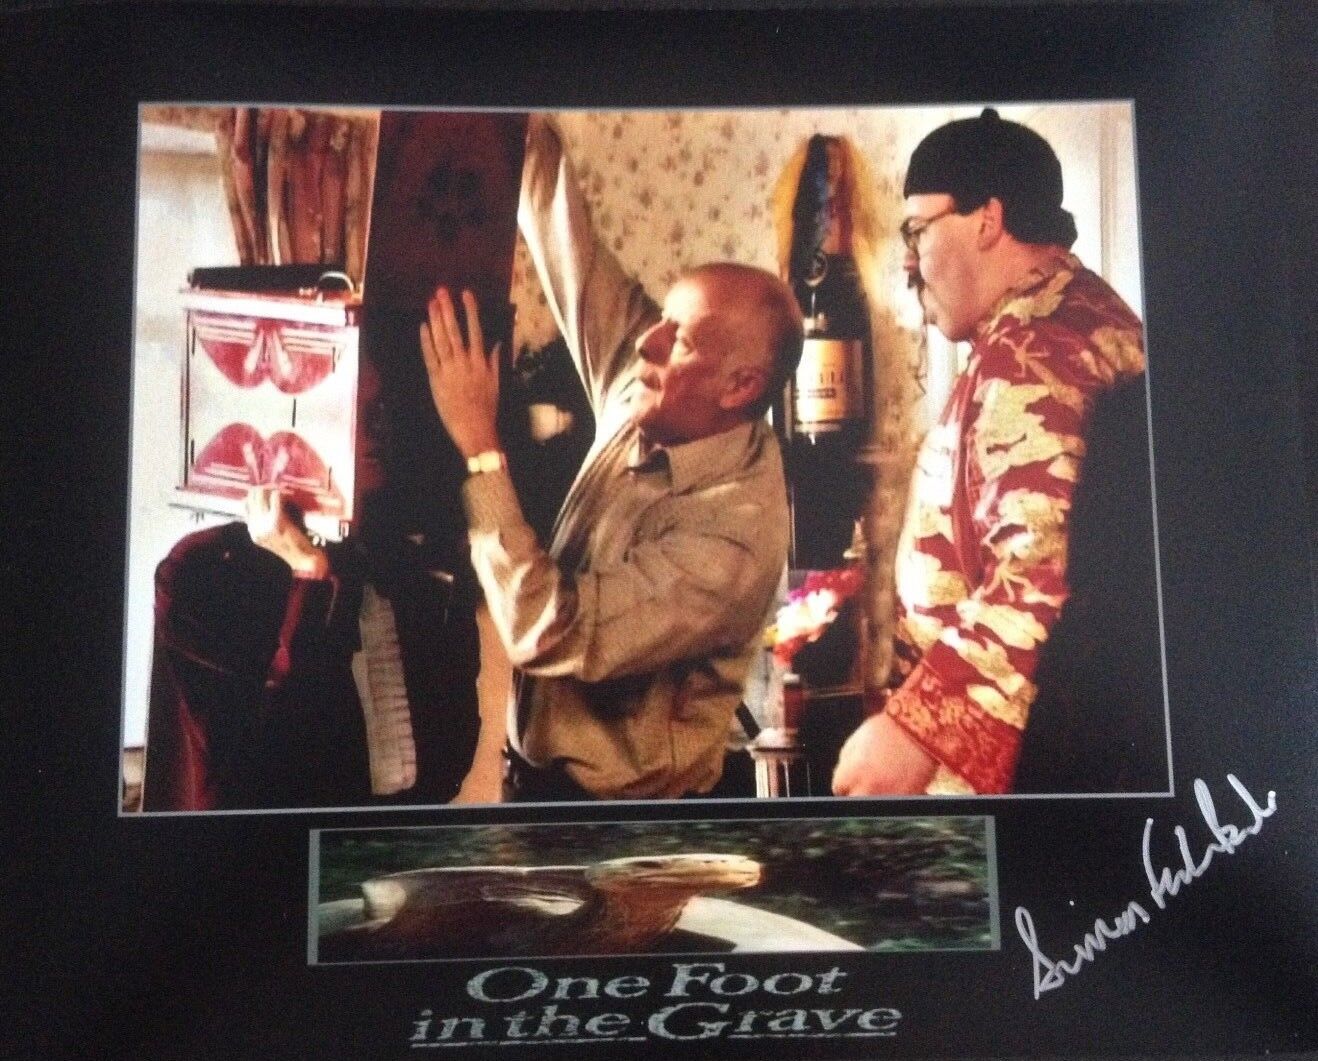 SIMON FISHER BECKER - ONE FOOT IN THE GRAVE ACTOR - SUPERB SIGNED Photo Poster painting